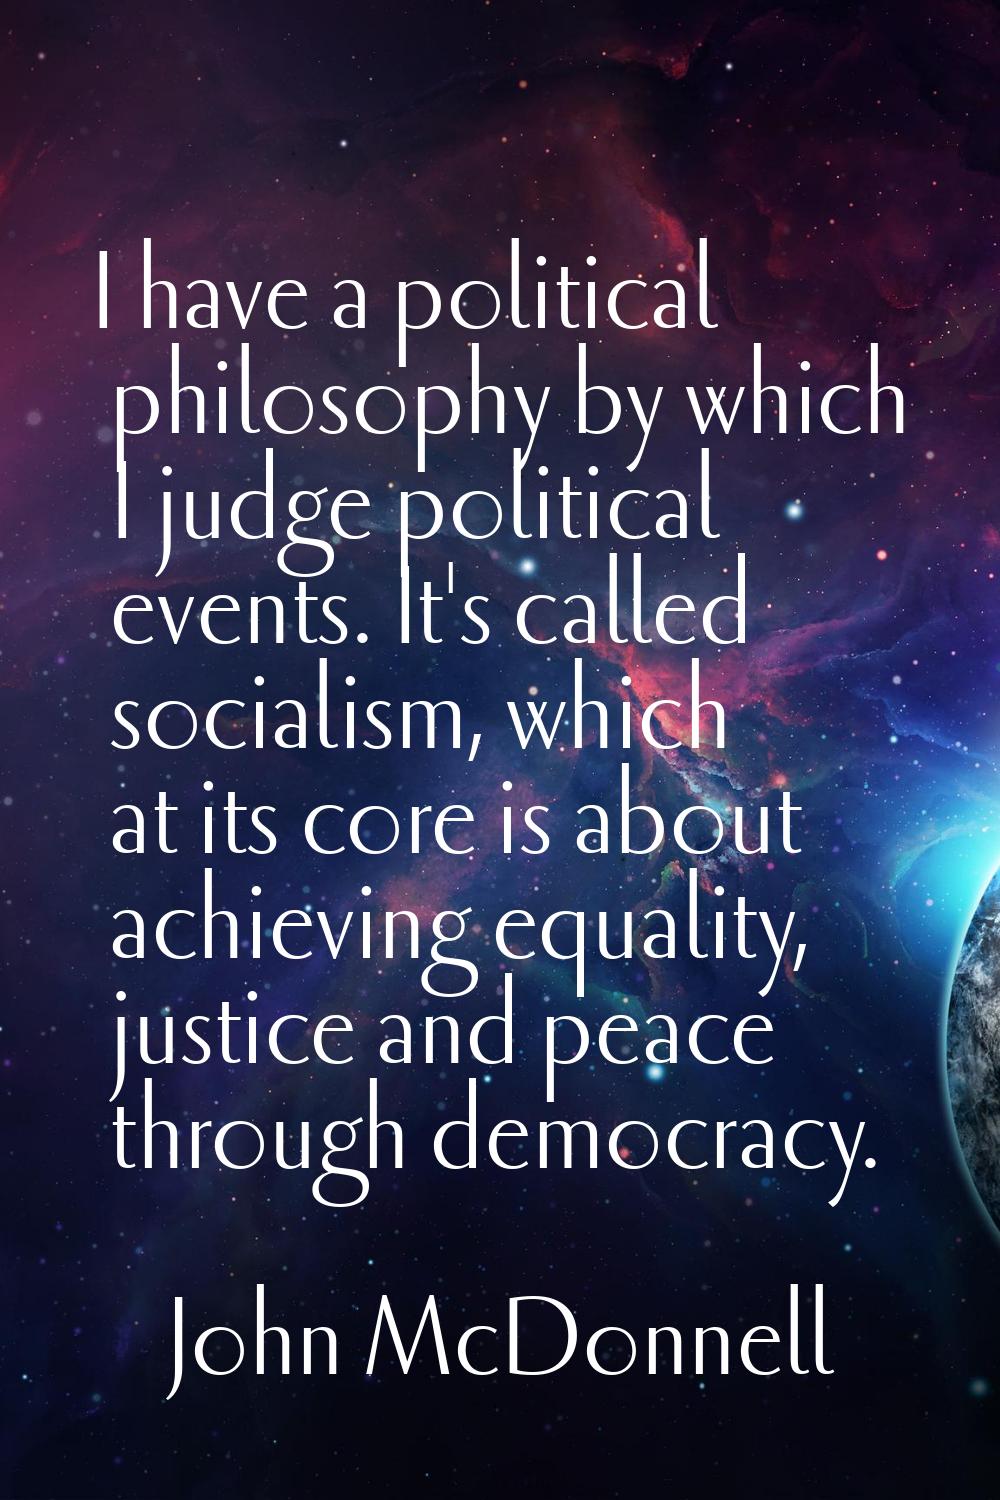 I have a political philosophy by which I judge political events. It's called socialism, which at it